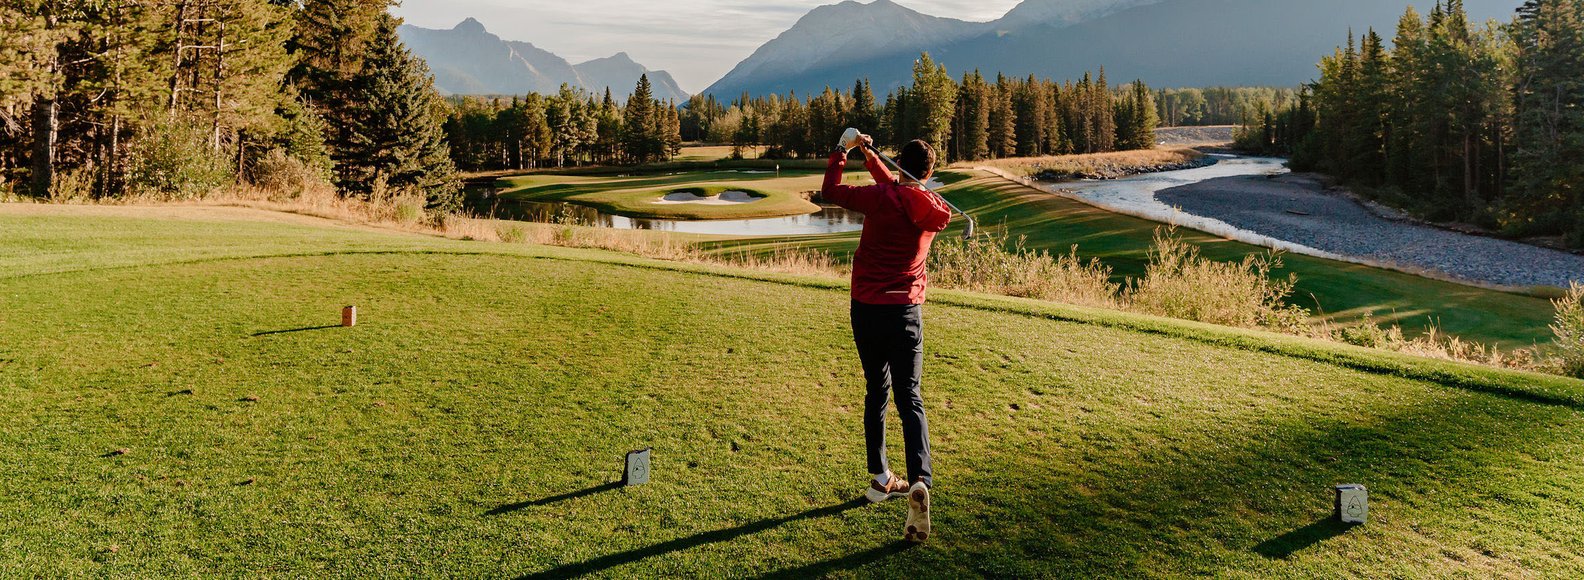 A golfer tees off at the Kananaskis Country Golf Course with mountains in the background.